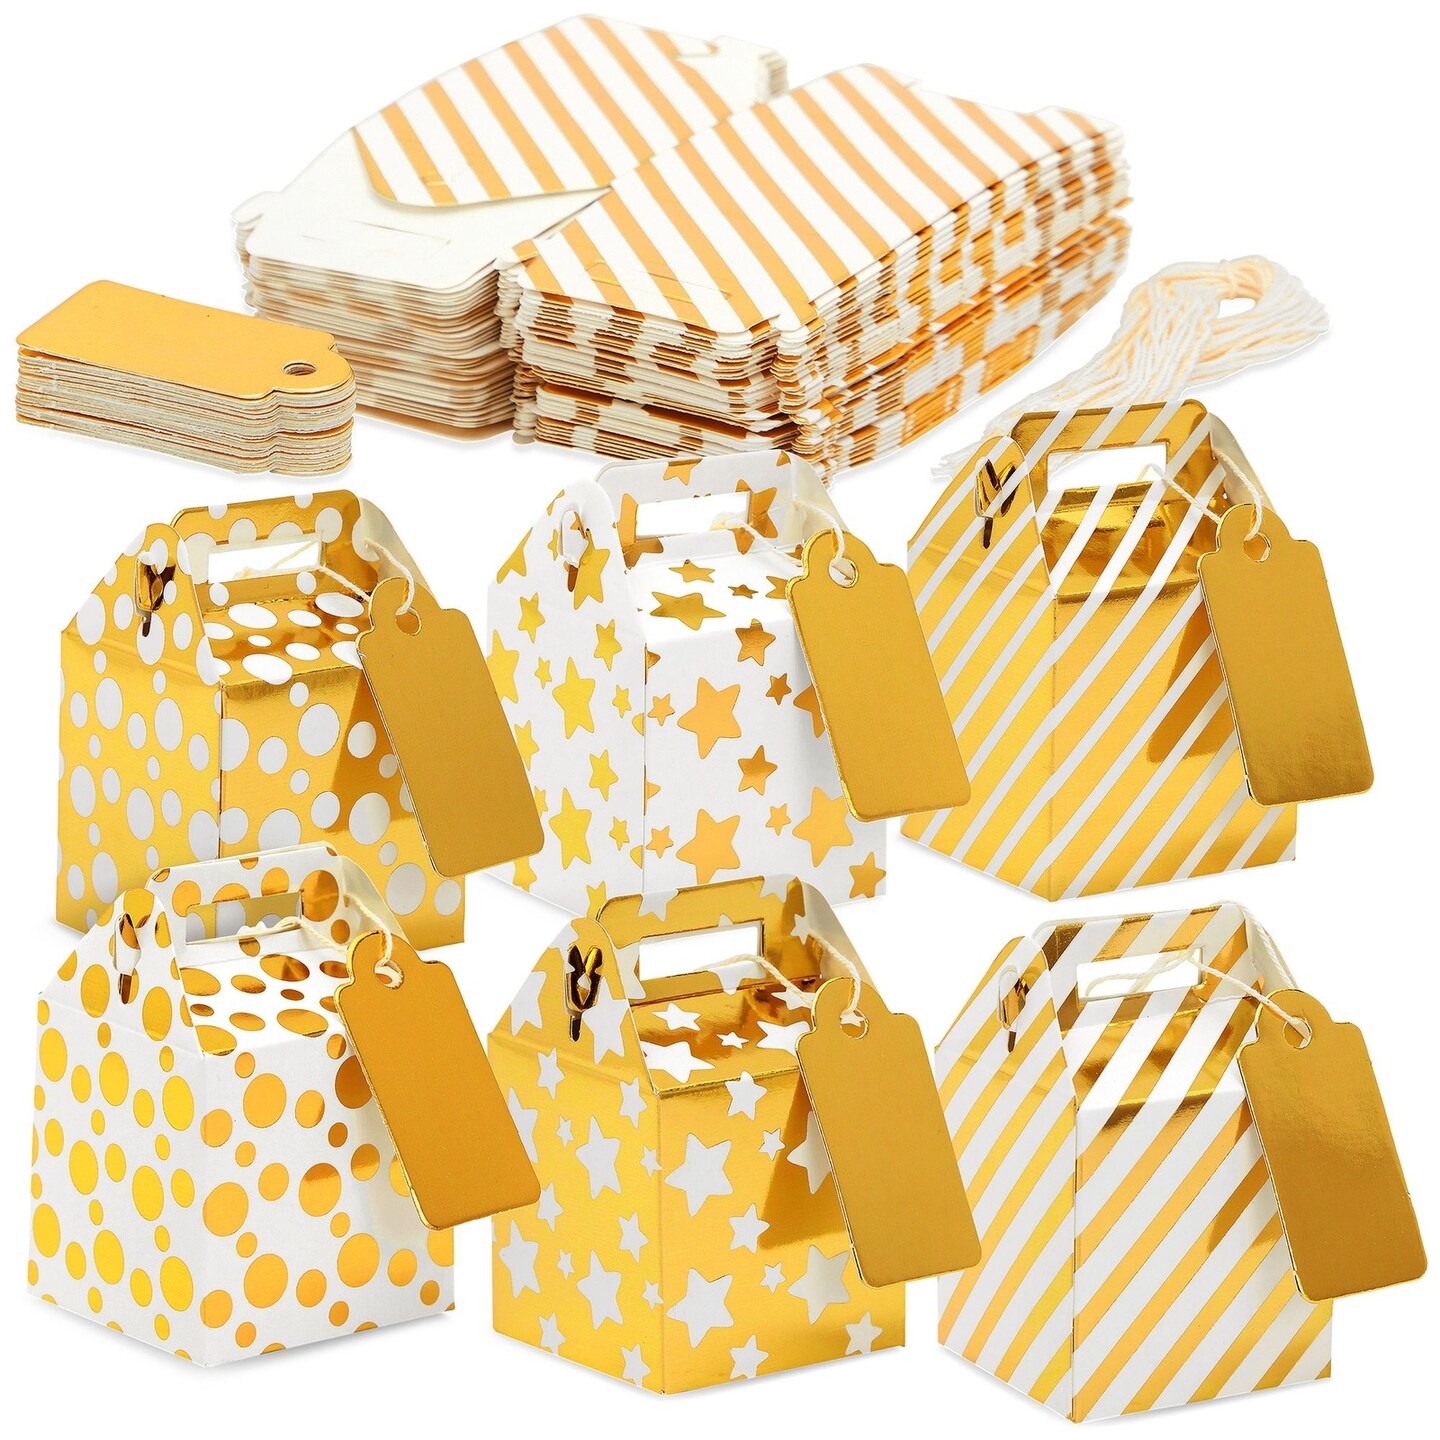 36-Pack Mini Gold Gift Boxes - Tiny 2x2x2 Favor Boxes for Wedding, Birthday, Treats, with Tags and String (3 Patterns)